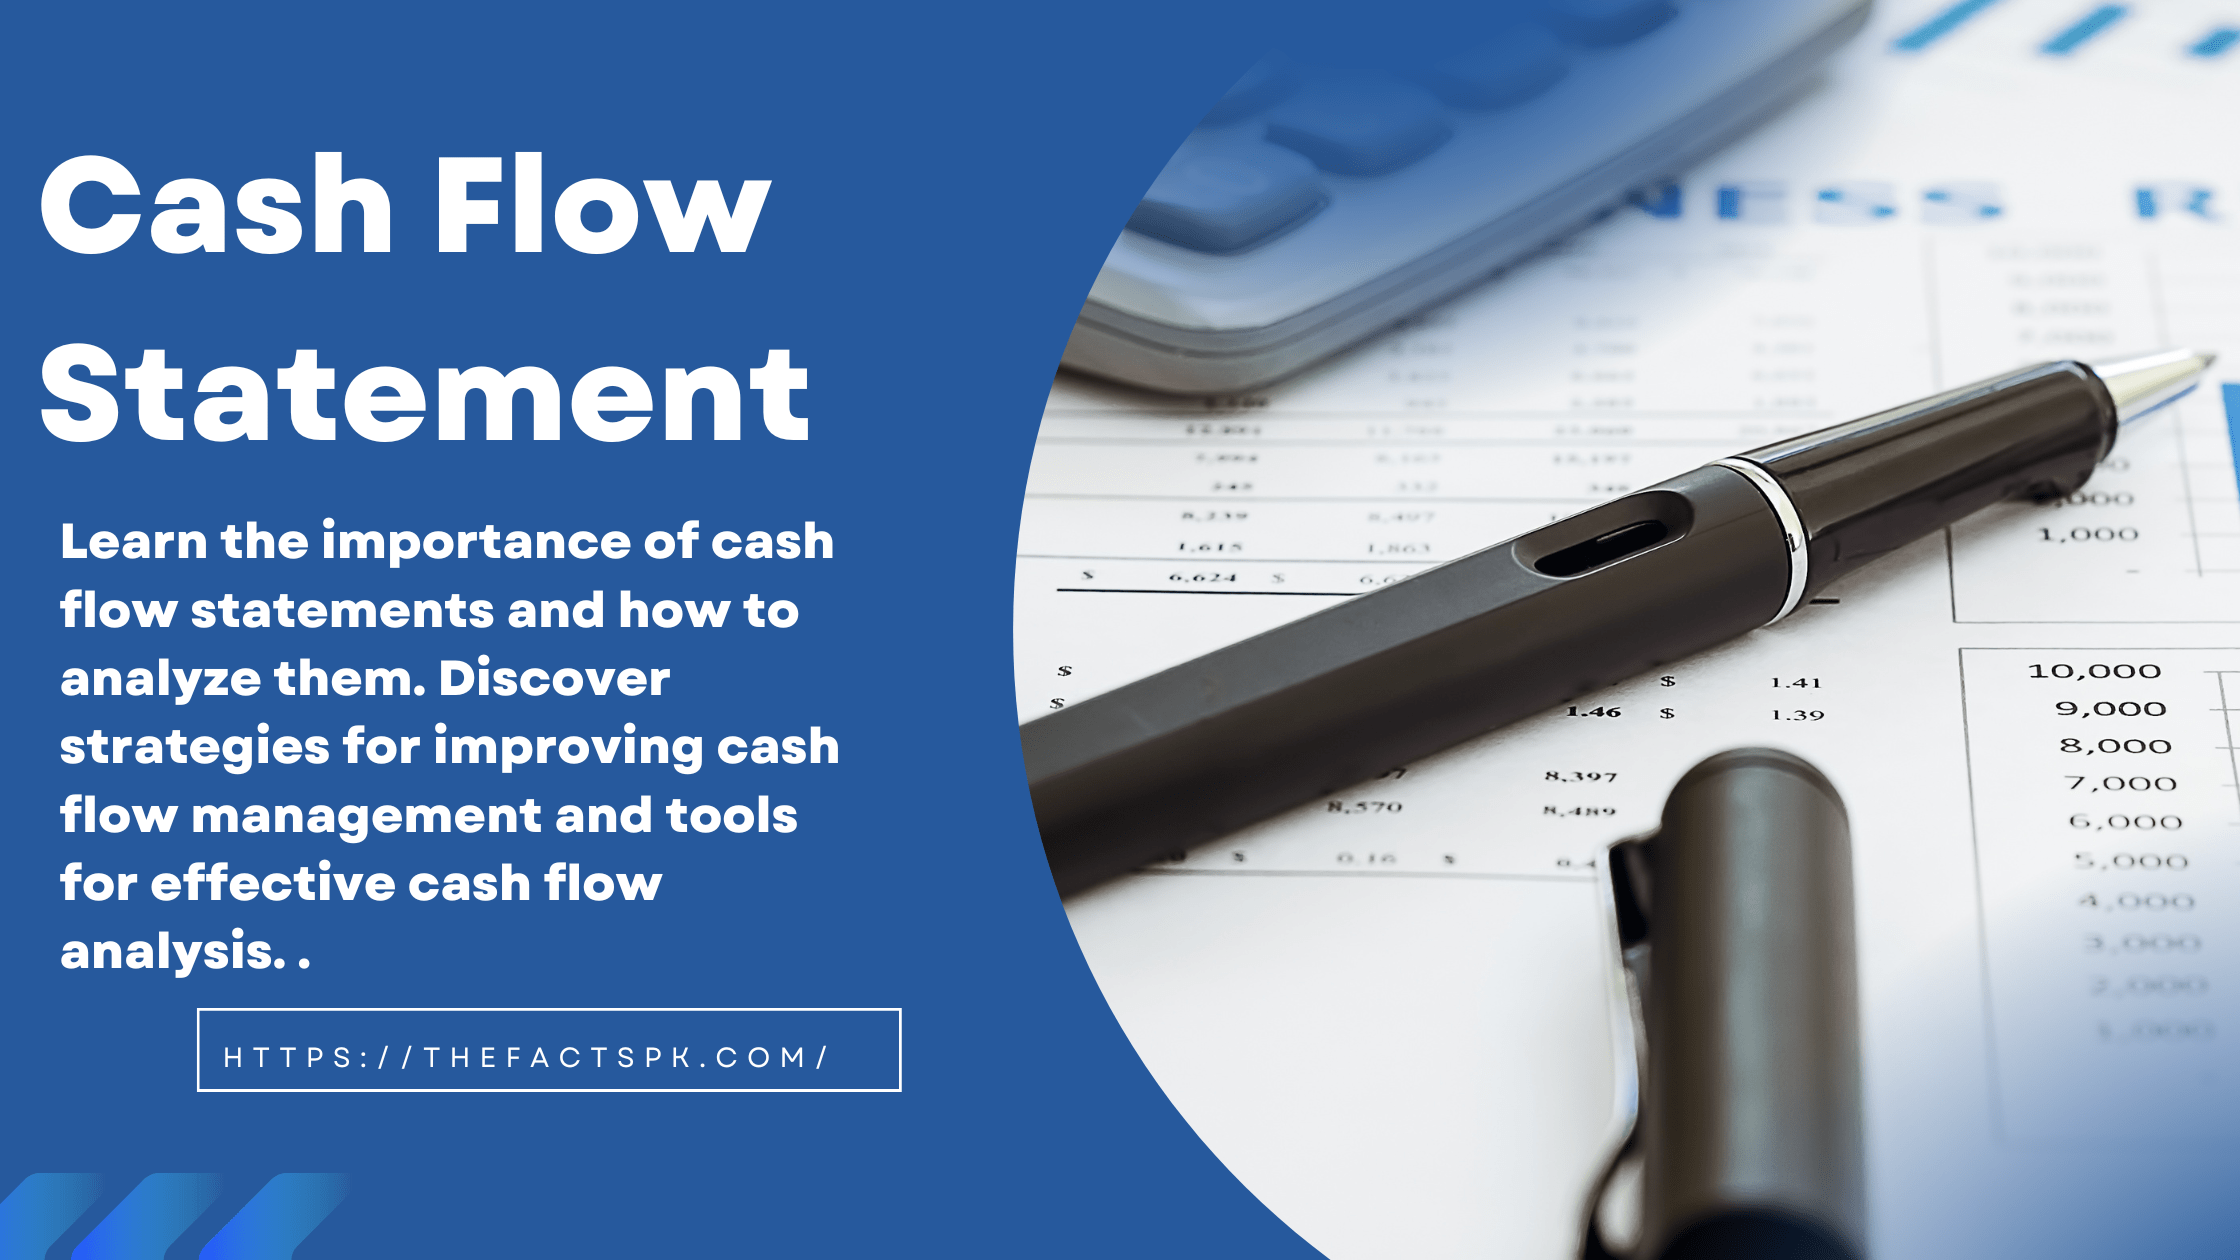 A comprehensive guide on cash flow statement.